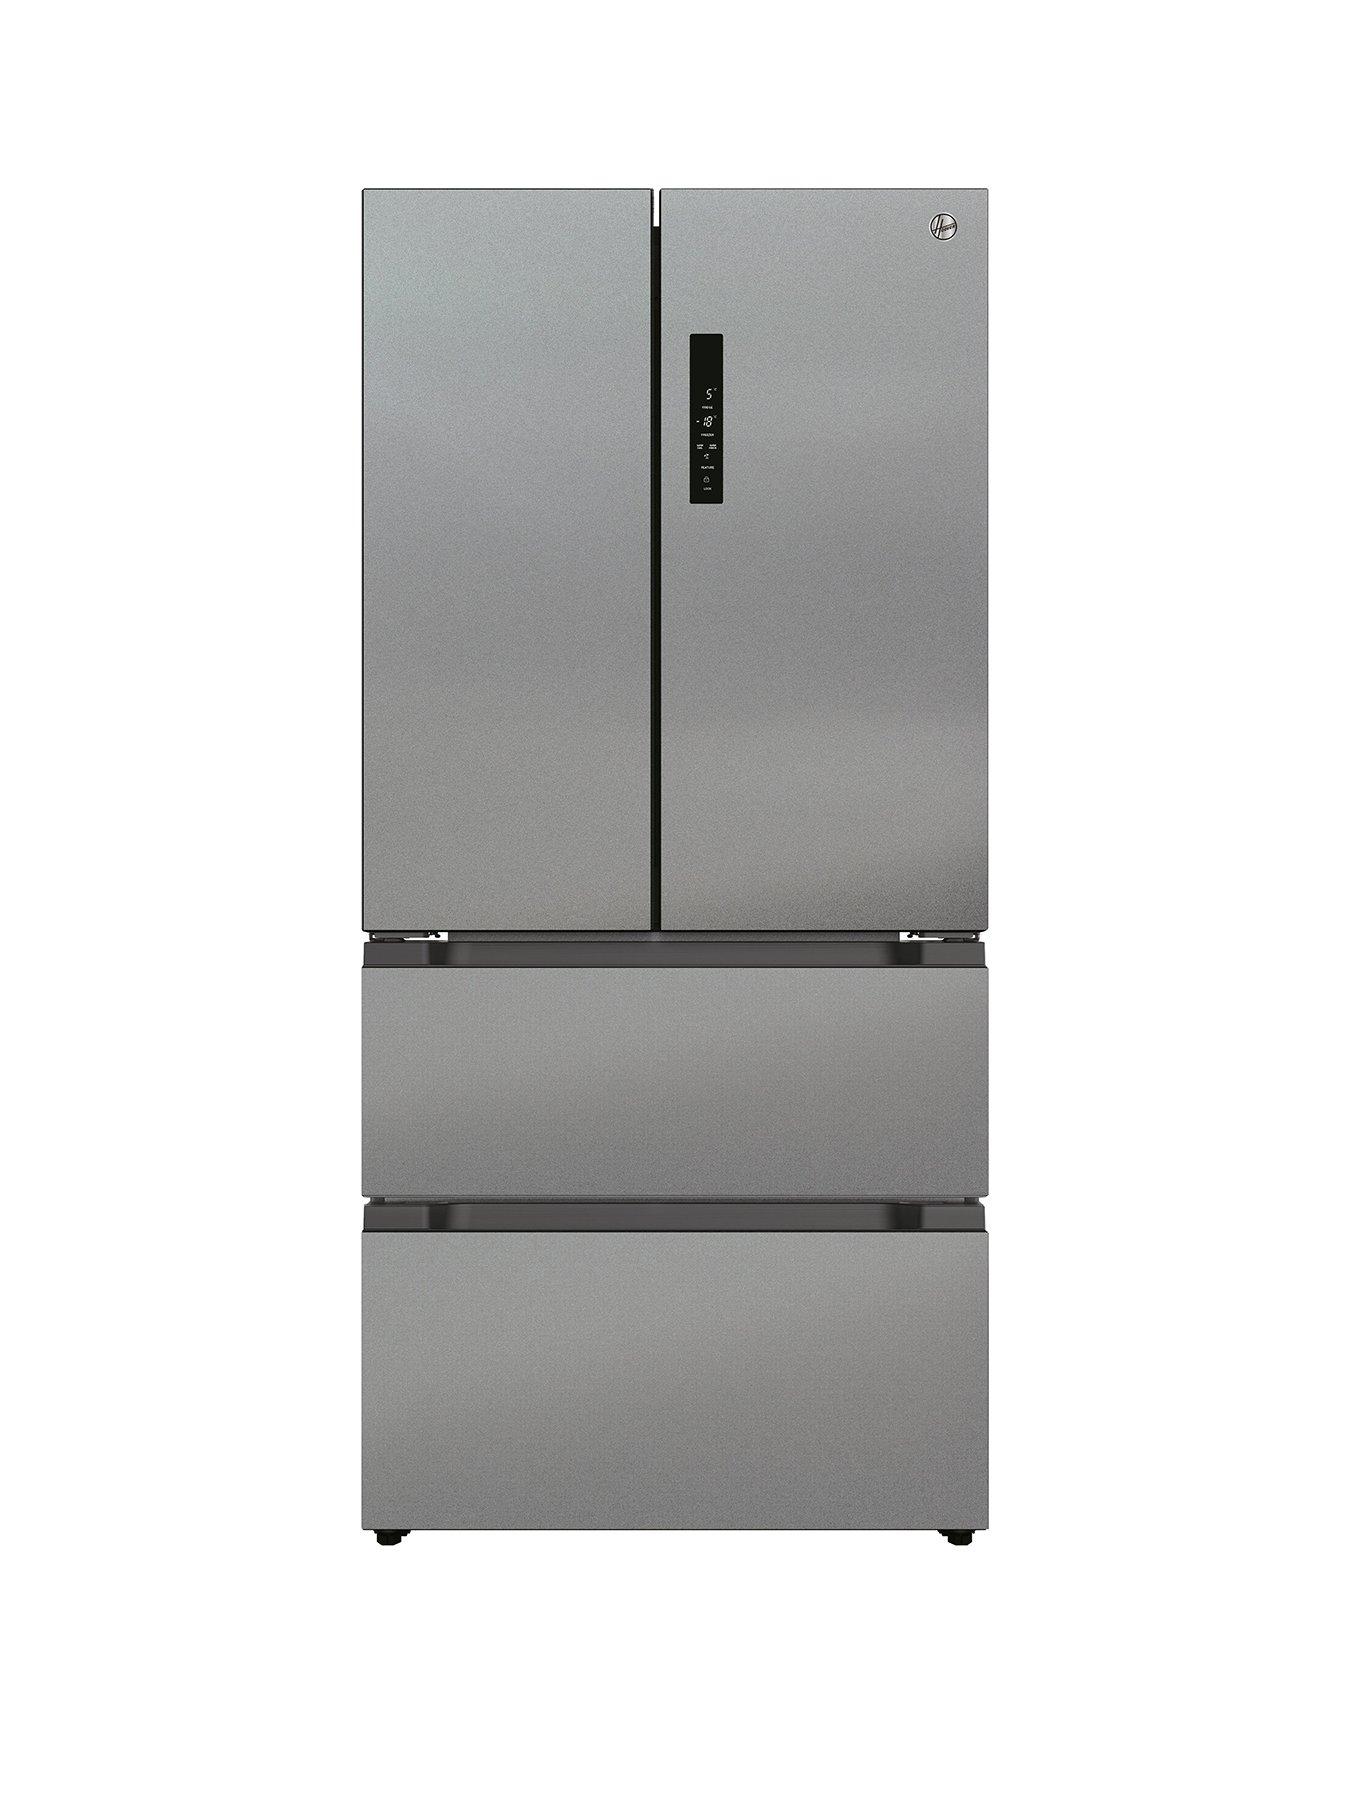 Hoover H-Fridge 700 Maxi Hsf818Fxk American Fridge Freezer With Total No Frost - Stainless Steel